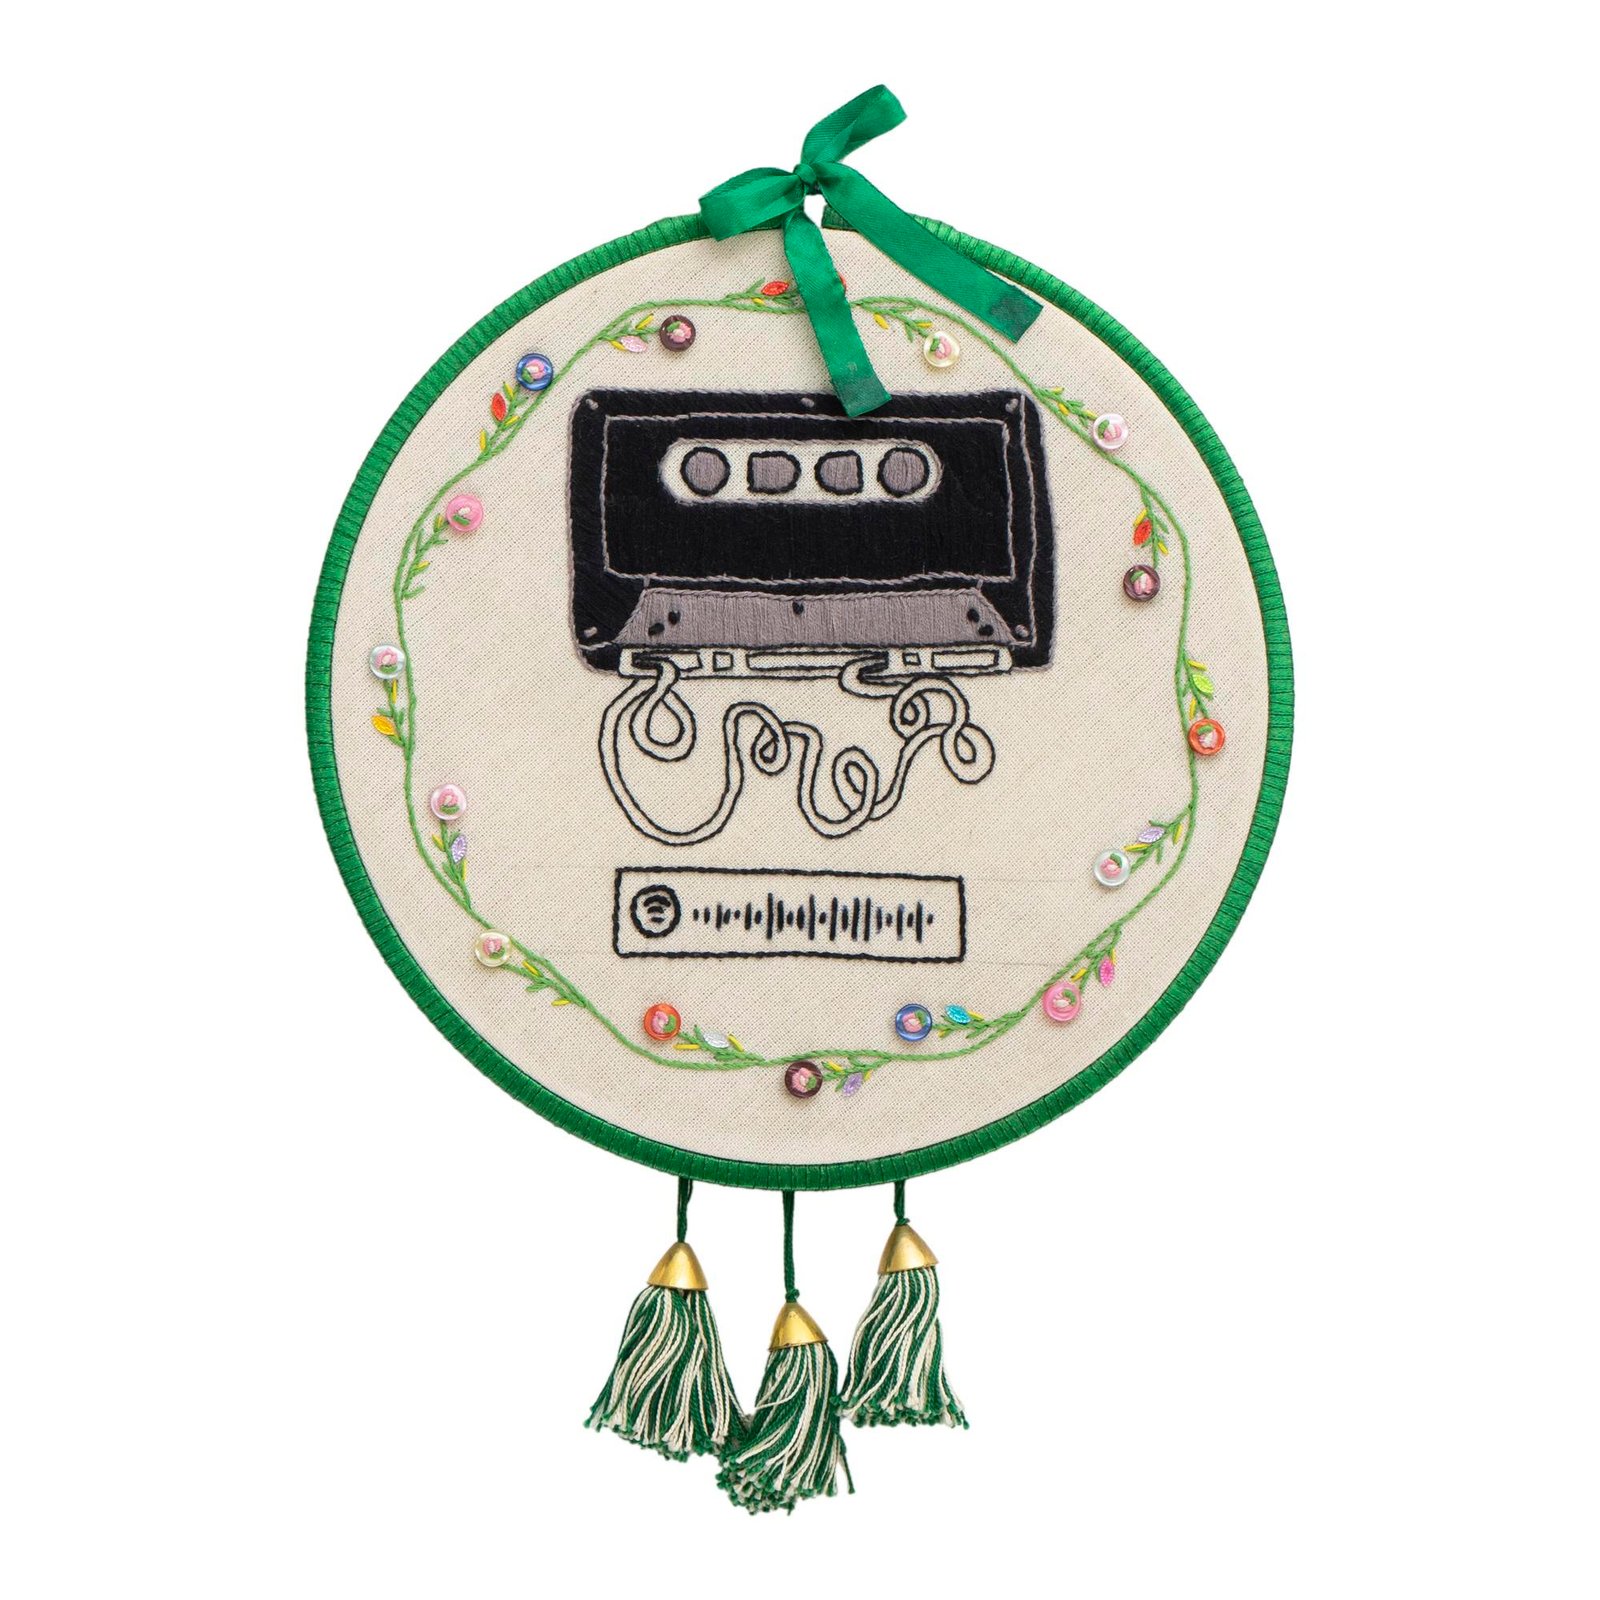 Buy Customisable Spotify Embroidery Hoop - SMEWIndia